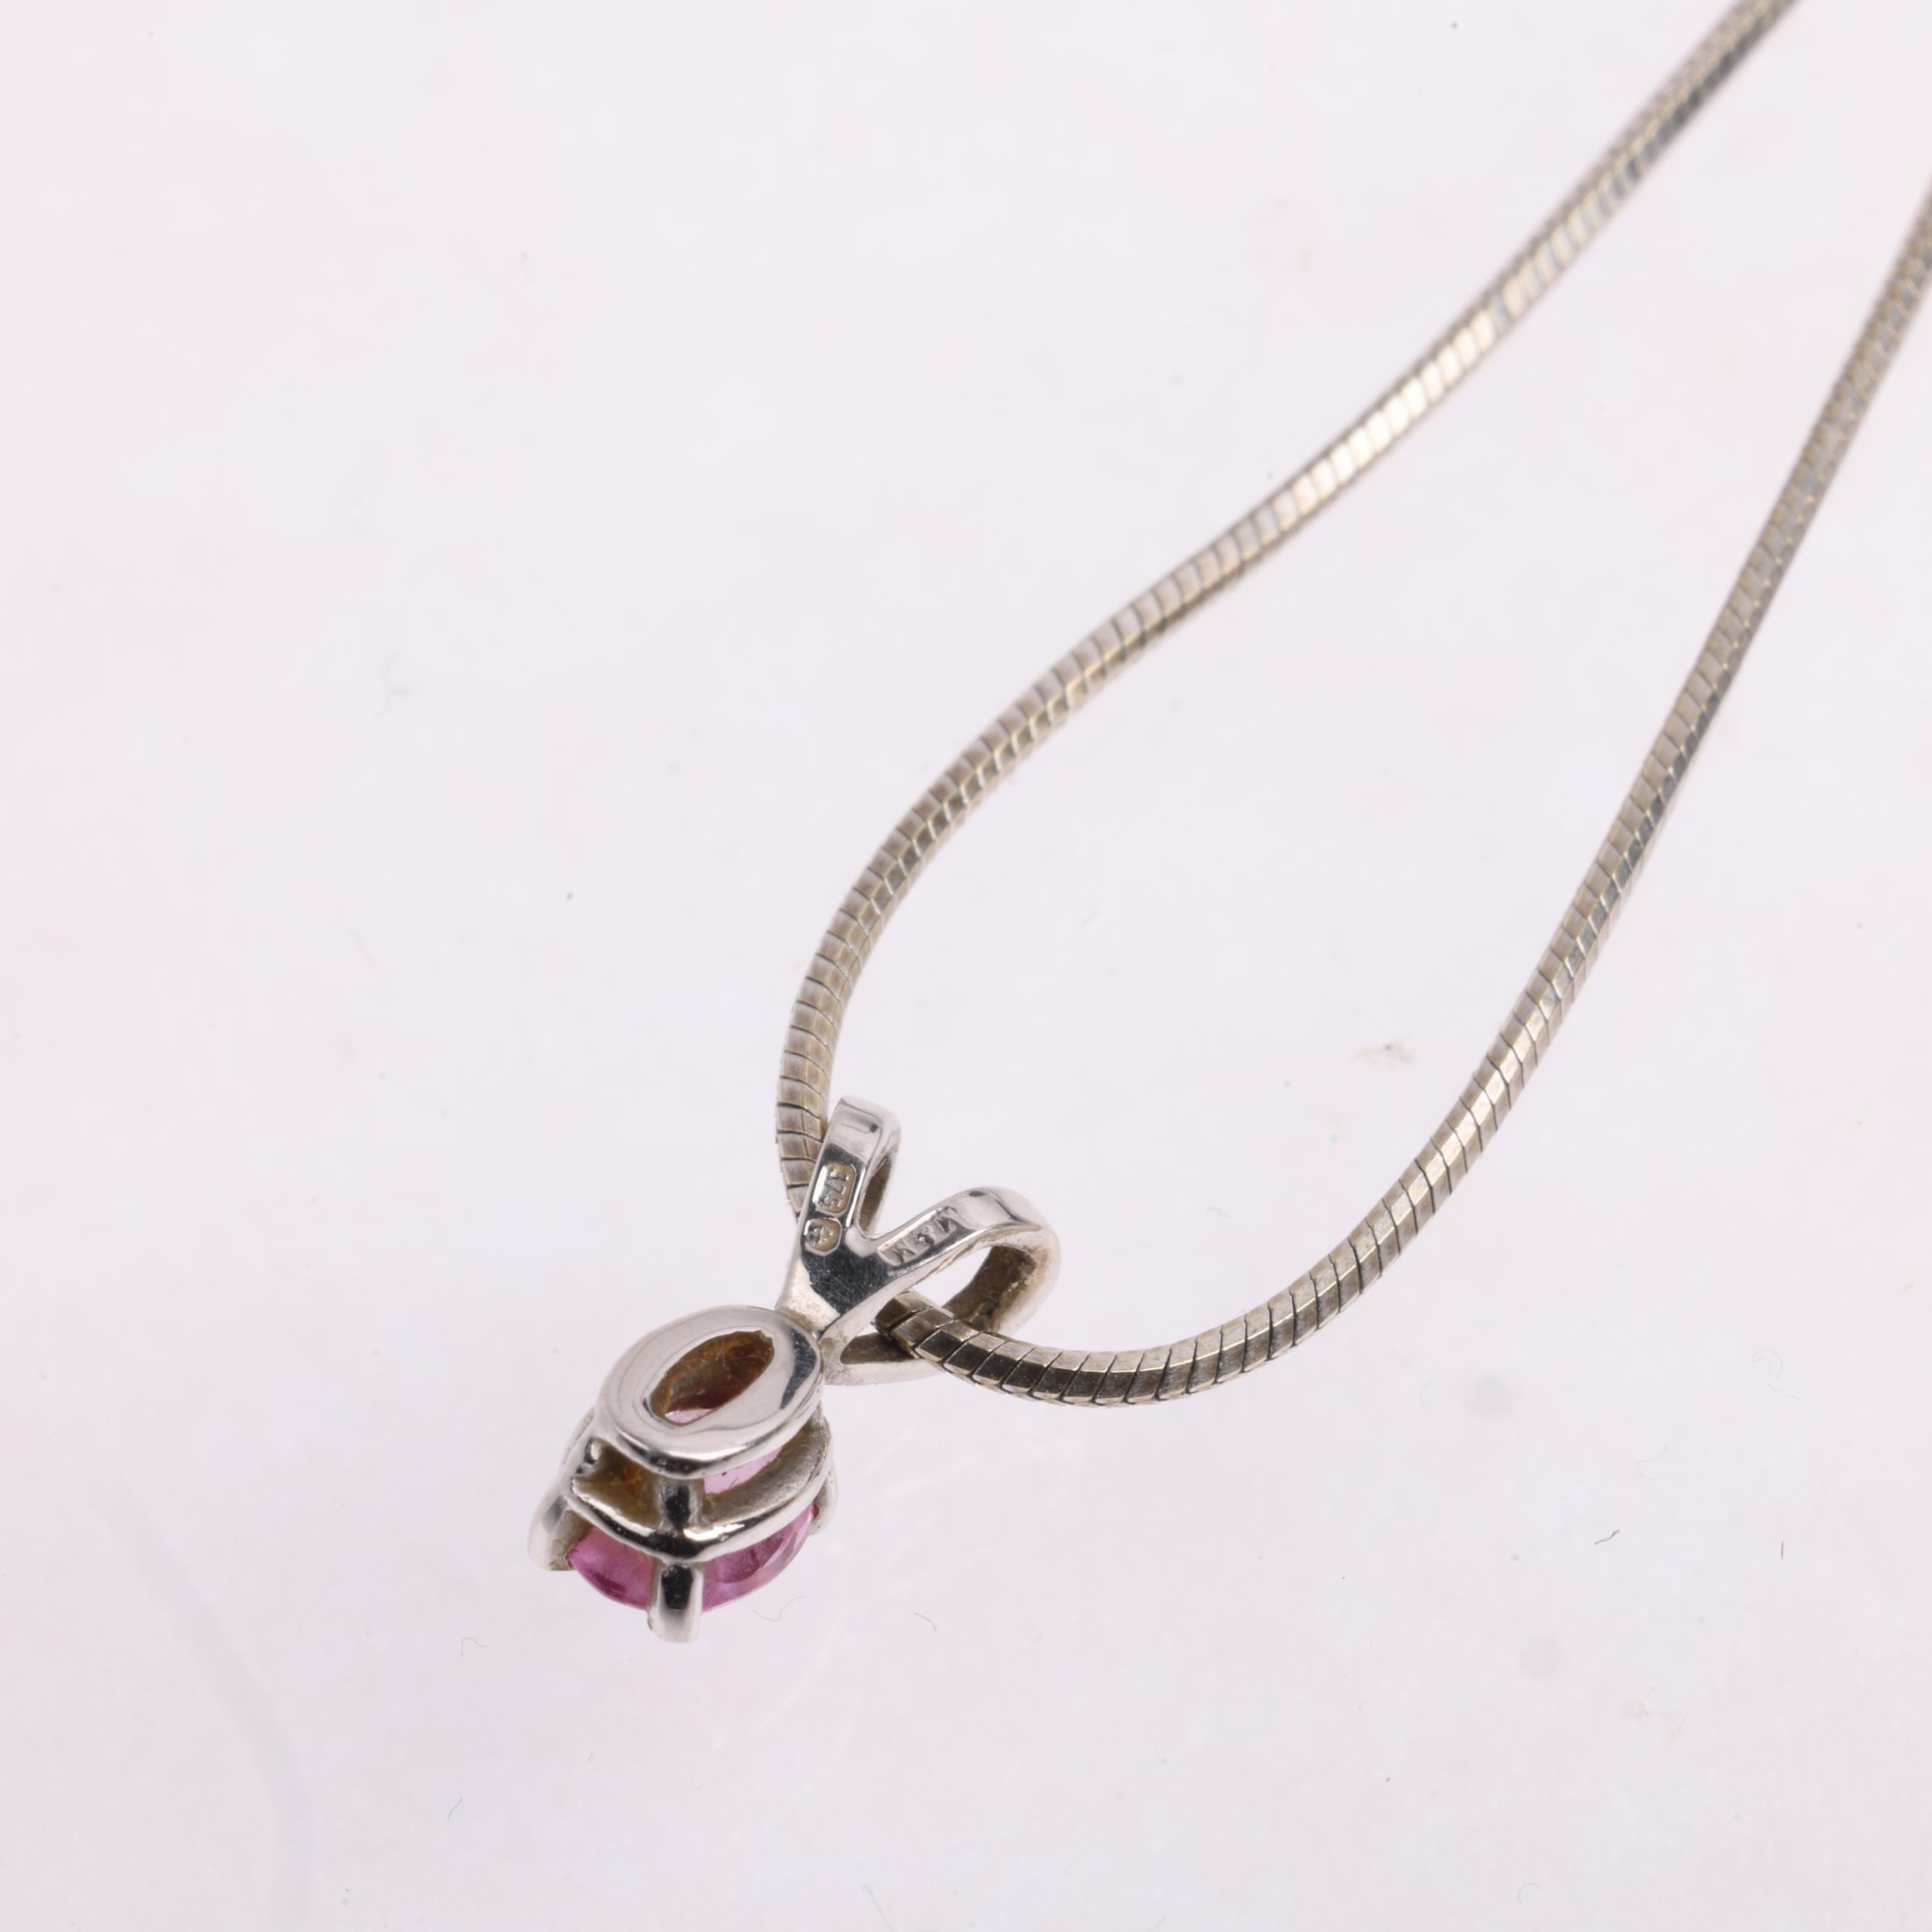 A 9ct white gold pink sapphire pendant necklace, on 9ct herringbone link chain, pendant 10.9mm, - Image 3 of 3